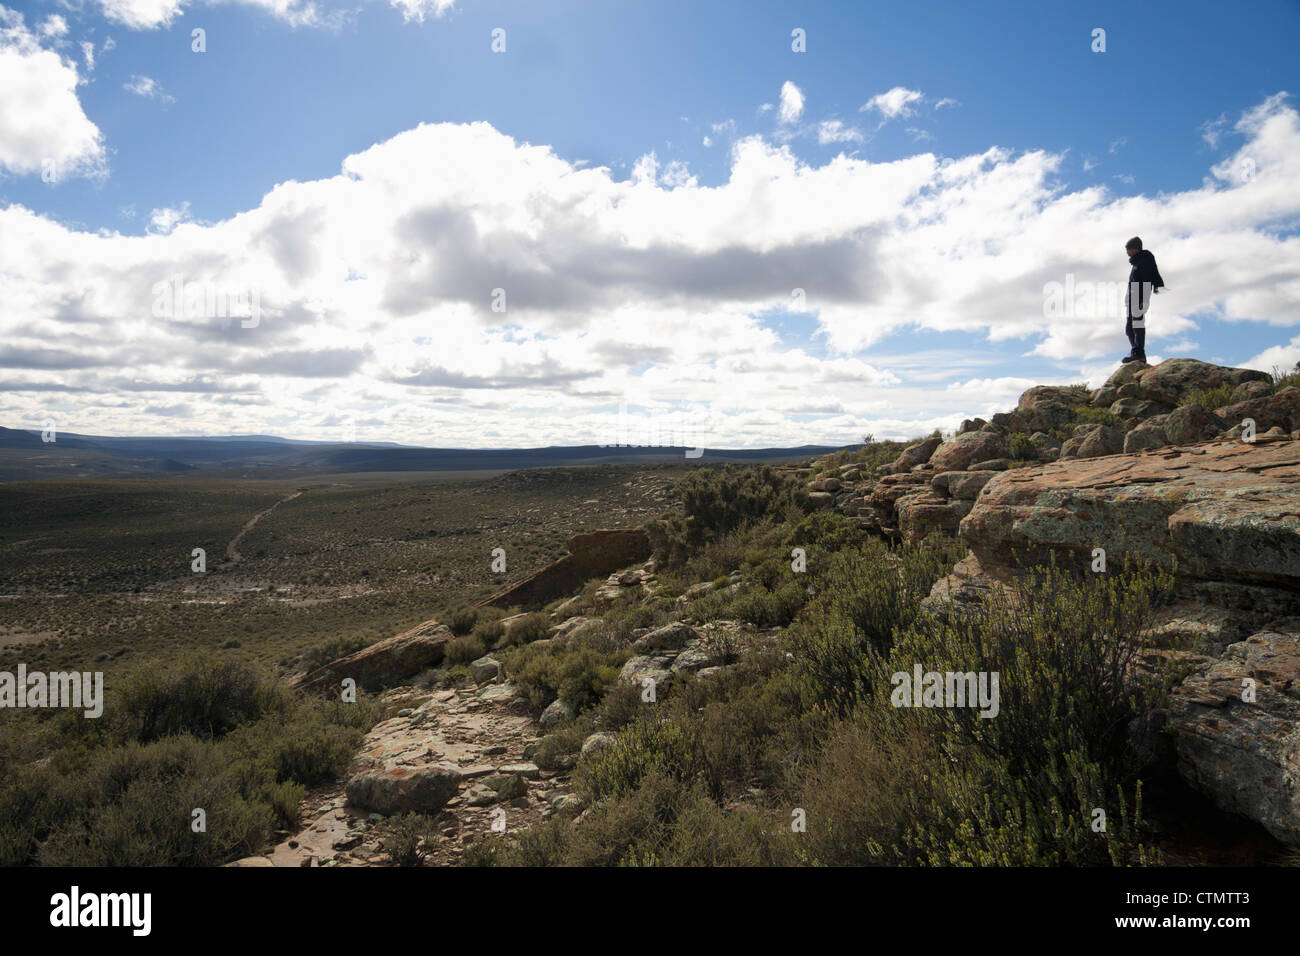 A teenage boy stands on a hill side, Great Karoo, South Africa Stock Photo